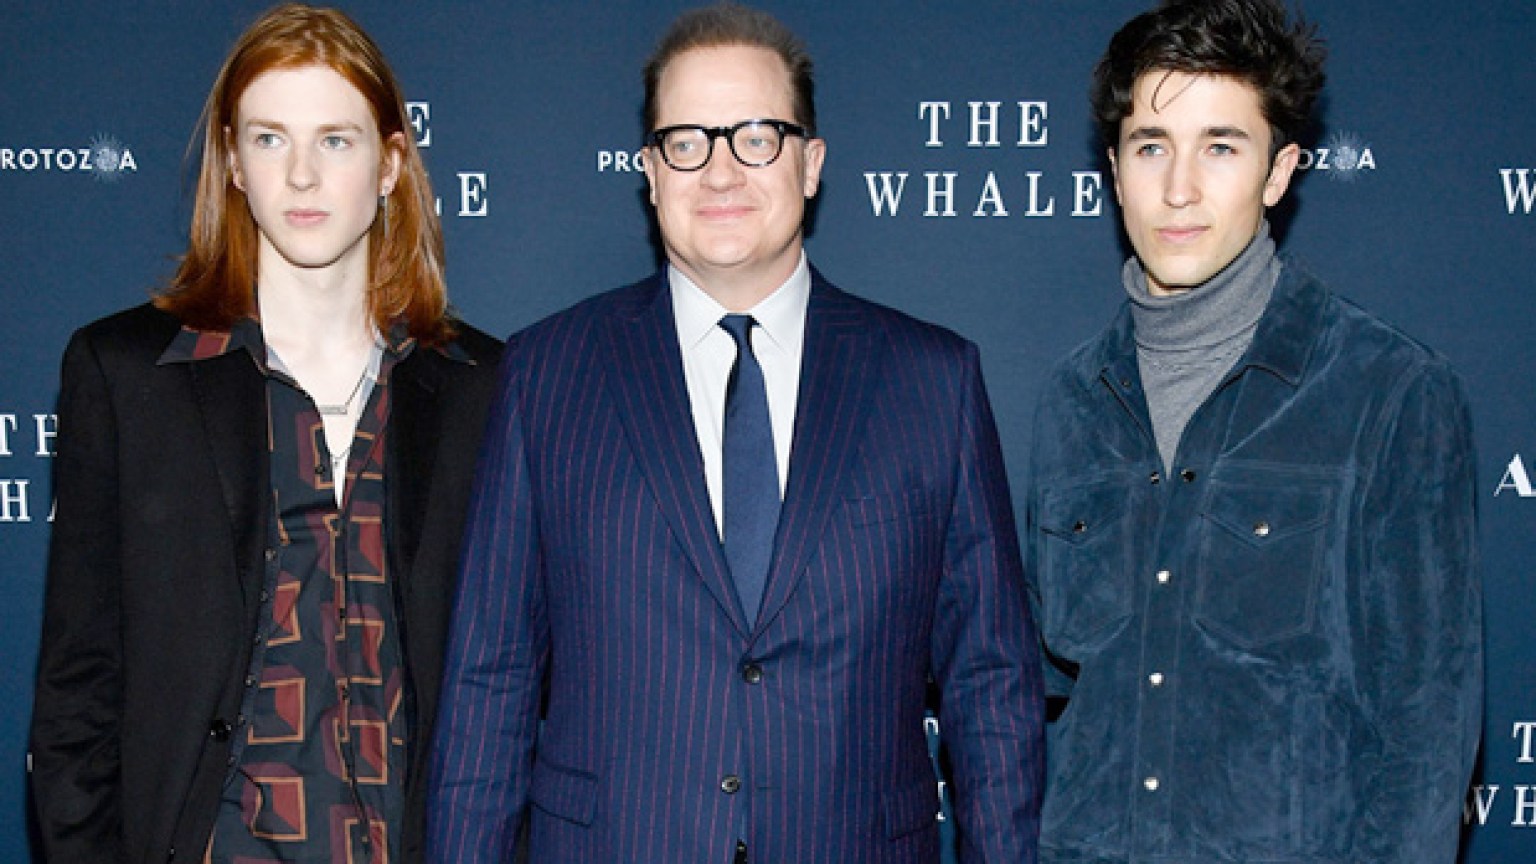 Brendan Fraser’s Sons Holden & Leland Attend NYC Screening With Him